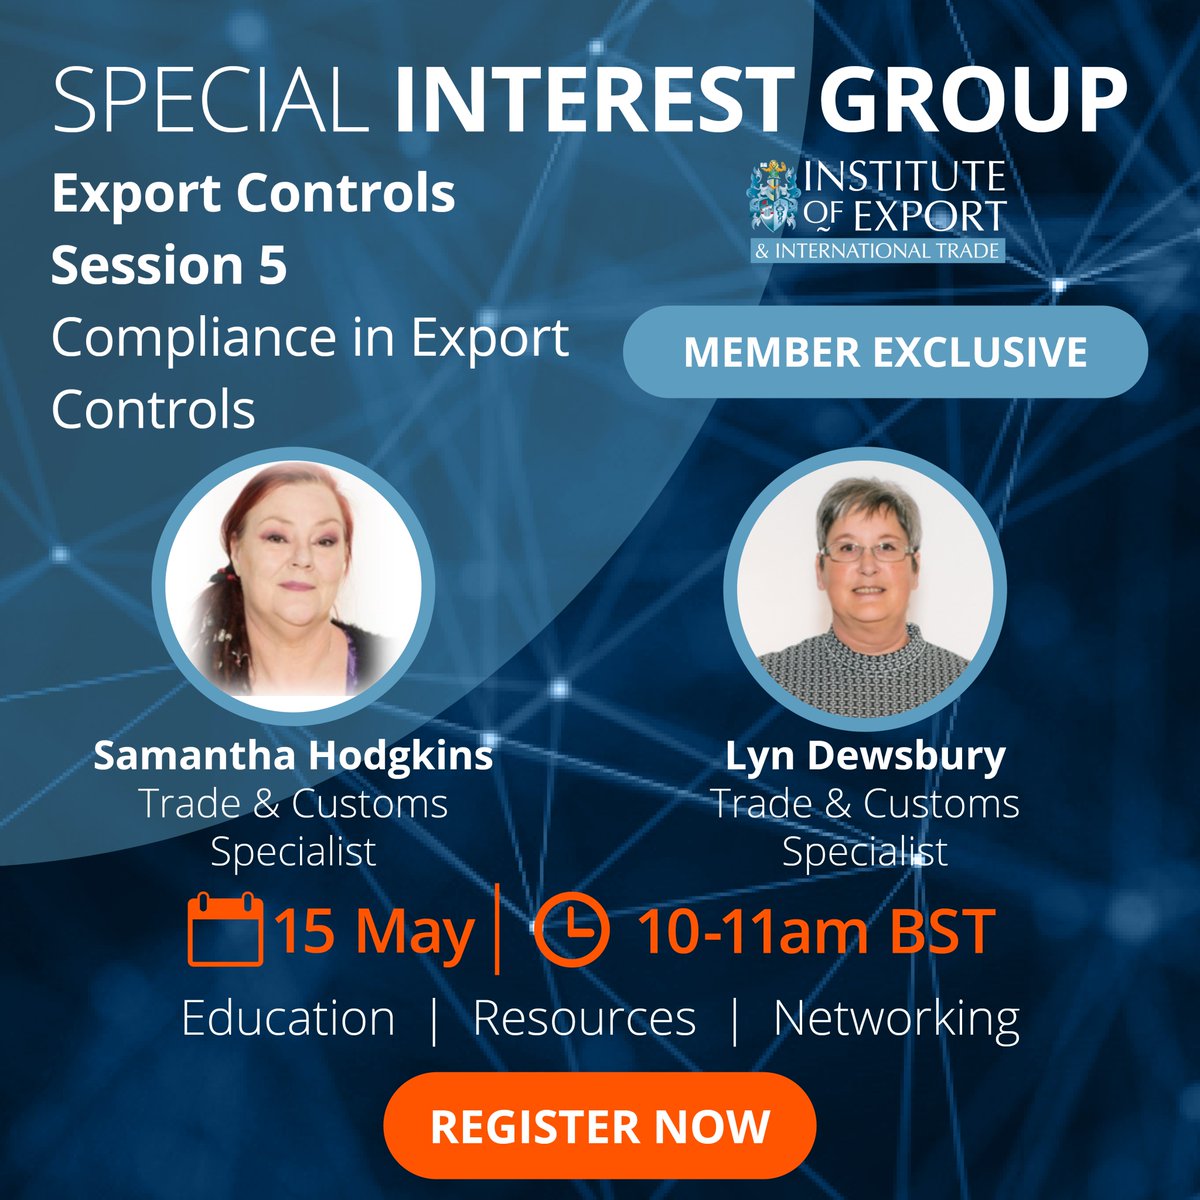 📢 Next Tuesday (14 May) we are hosting session 5 of our #ExportControls SIG in which we will discuss how to remain complaint with #export controls and hear from industry-leading experts on how to abide by any new laws and regulations. sign-up 👉ow.ly/Lkxn50RAyZo